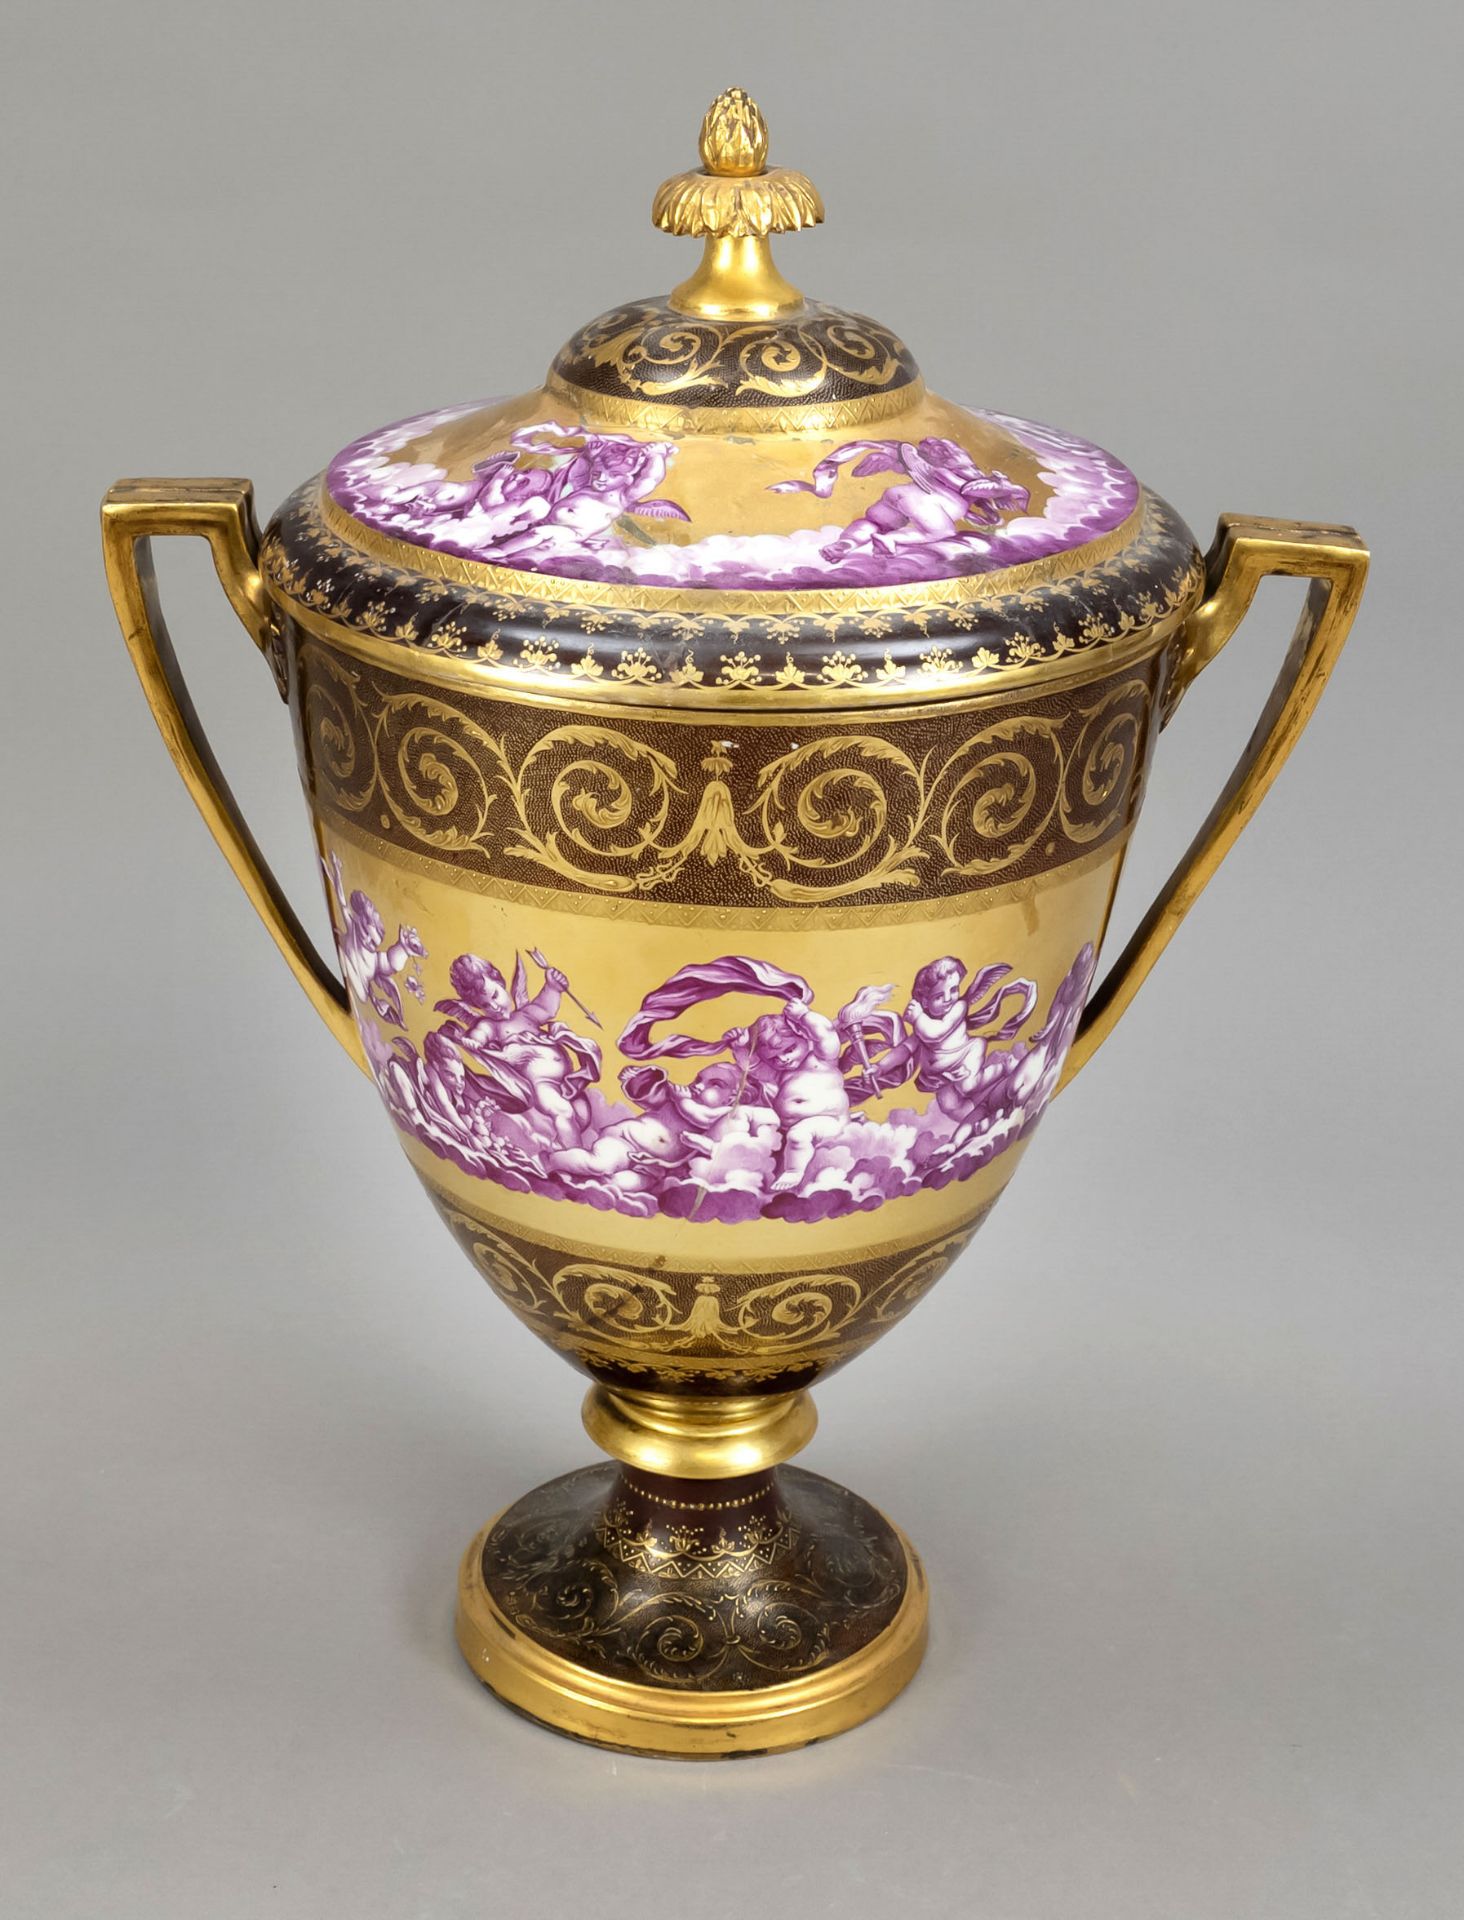 Classicism lidded vase, Augarten, Vienna, pressed date 1809, on round foot rising urn body with